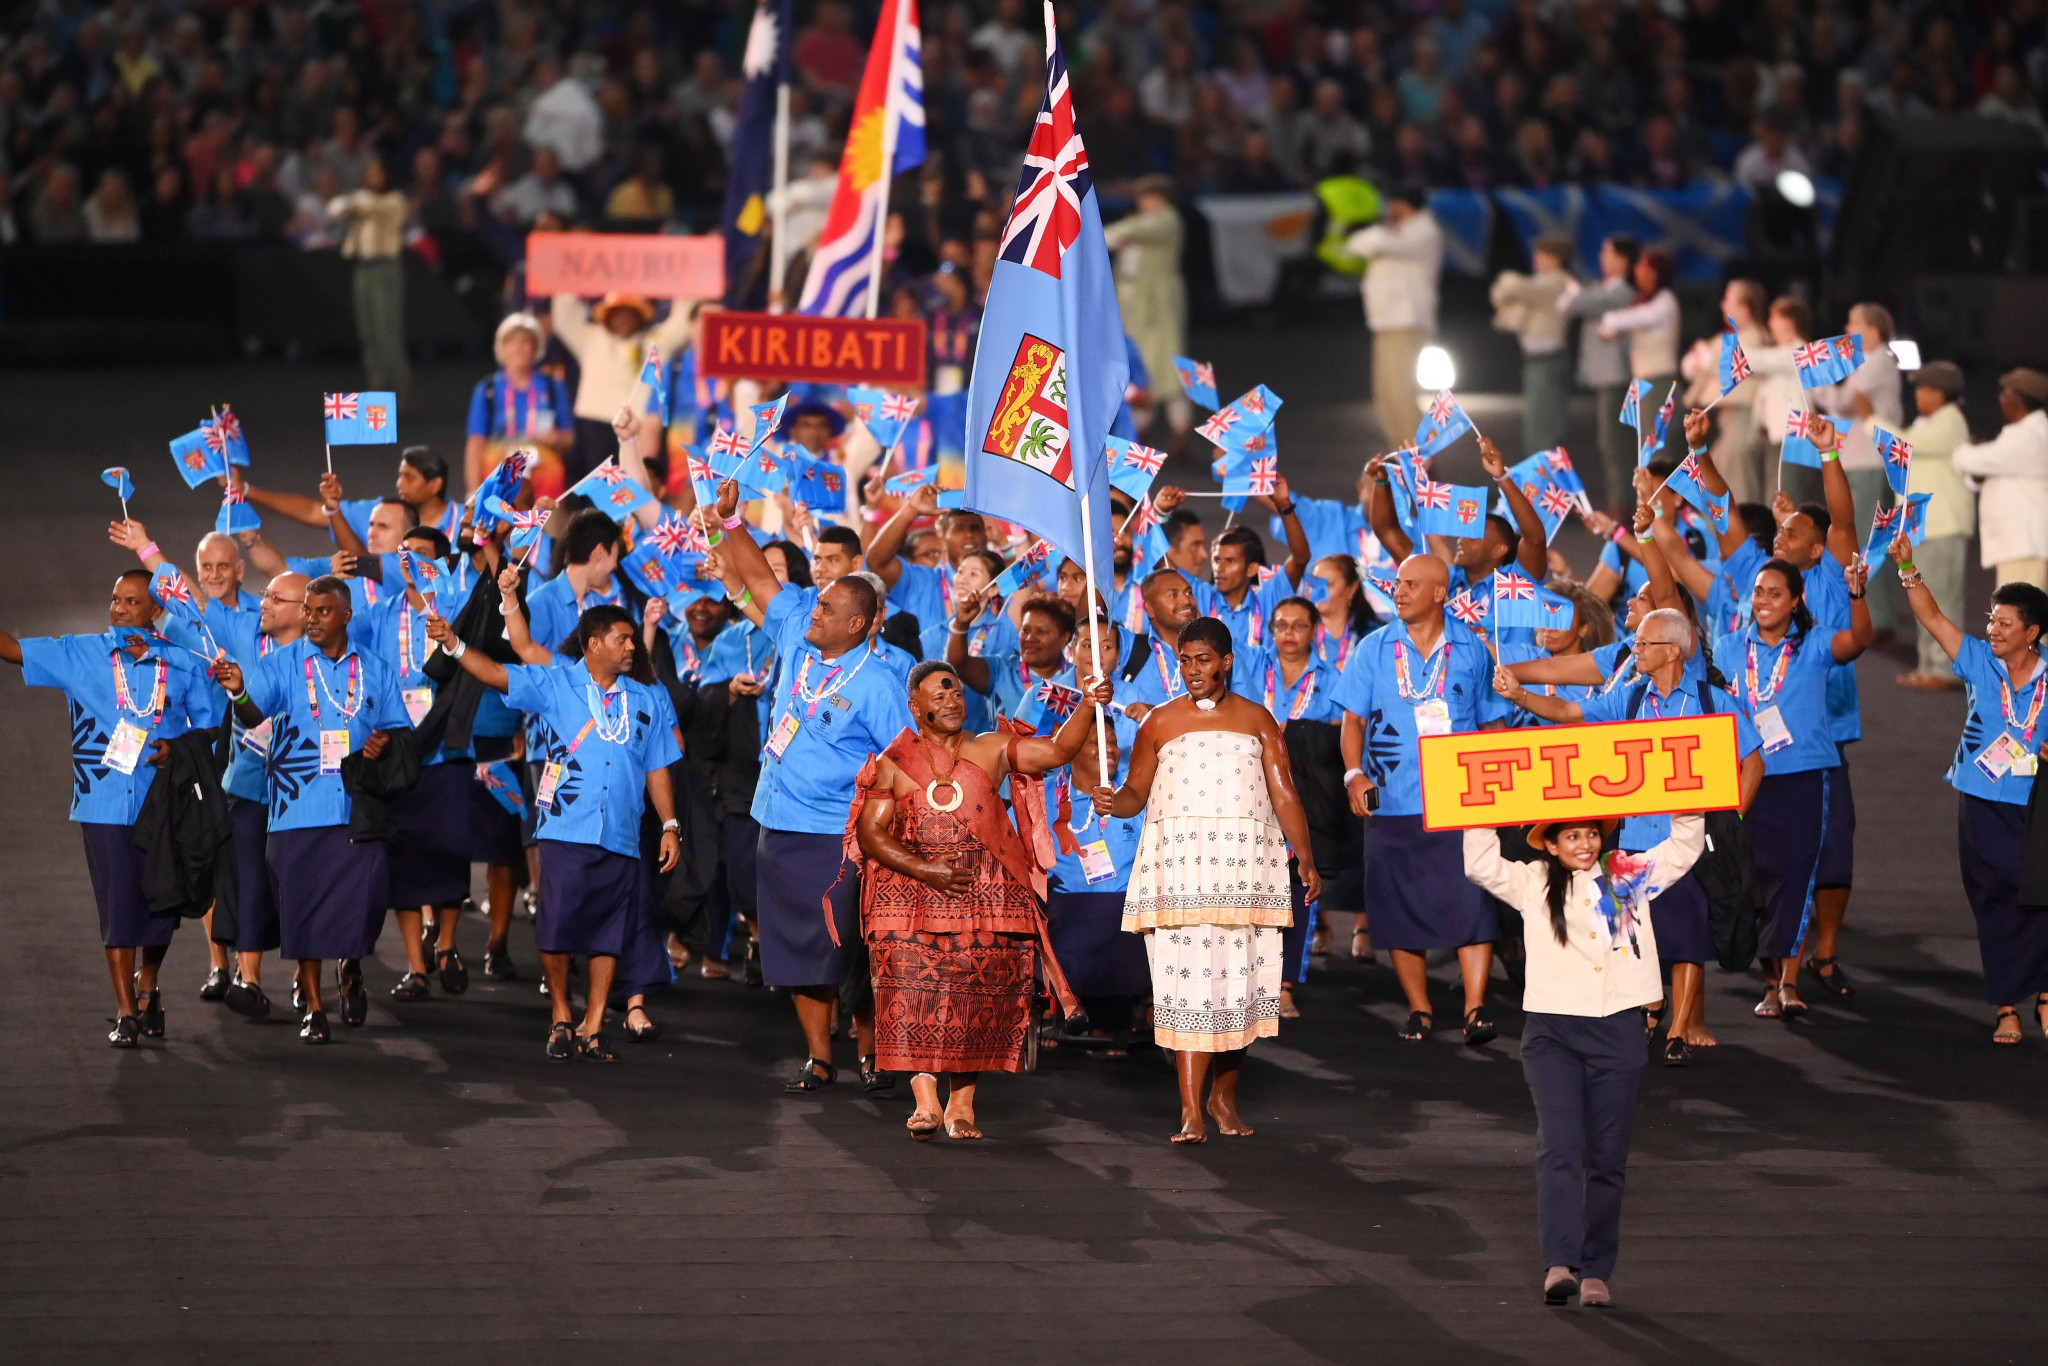 Fiji finished 5th in the medals table during the 2019 Pacific Games in Samoa ©Getty Images